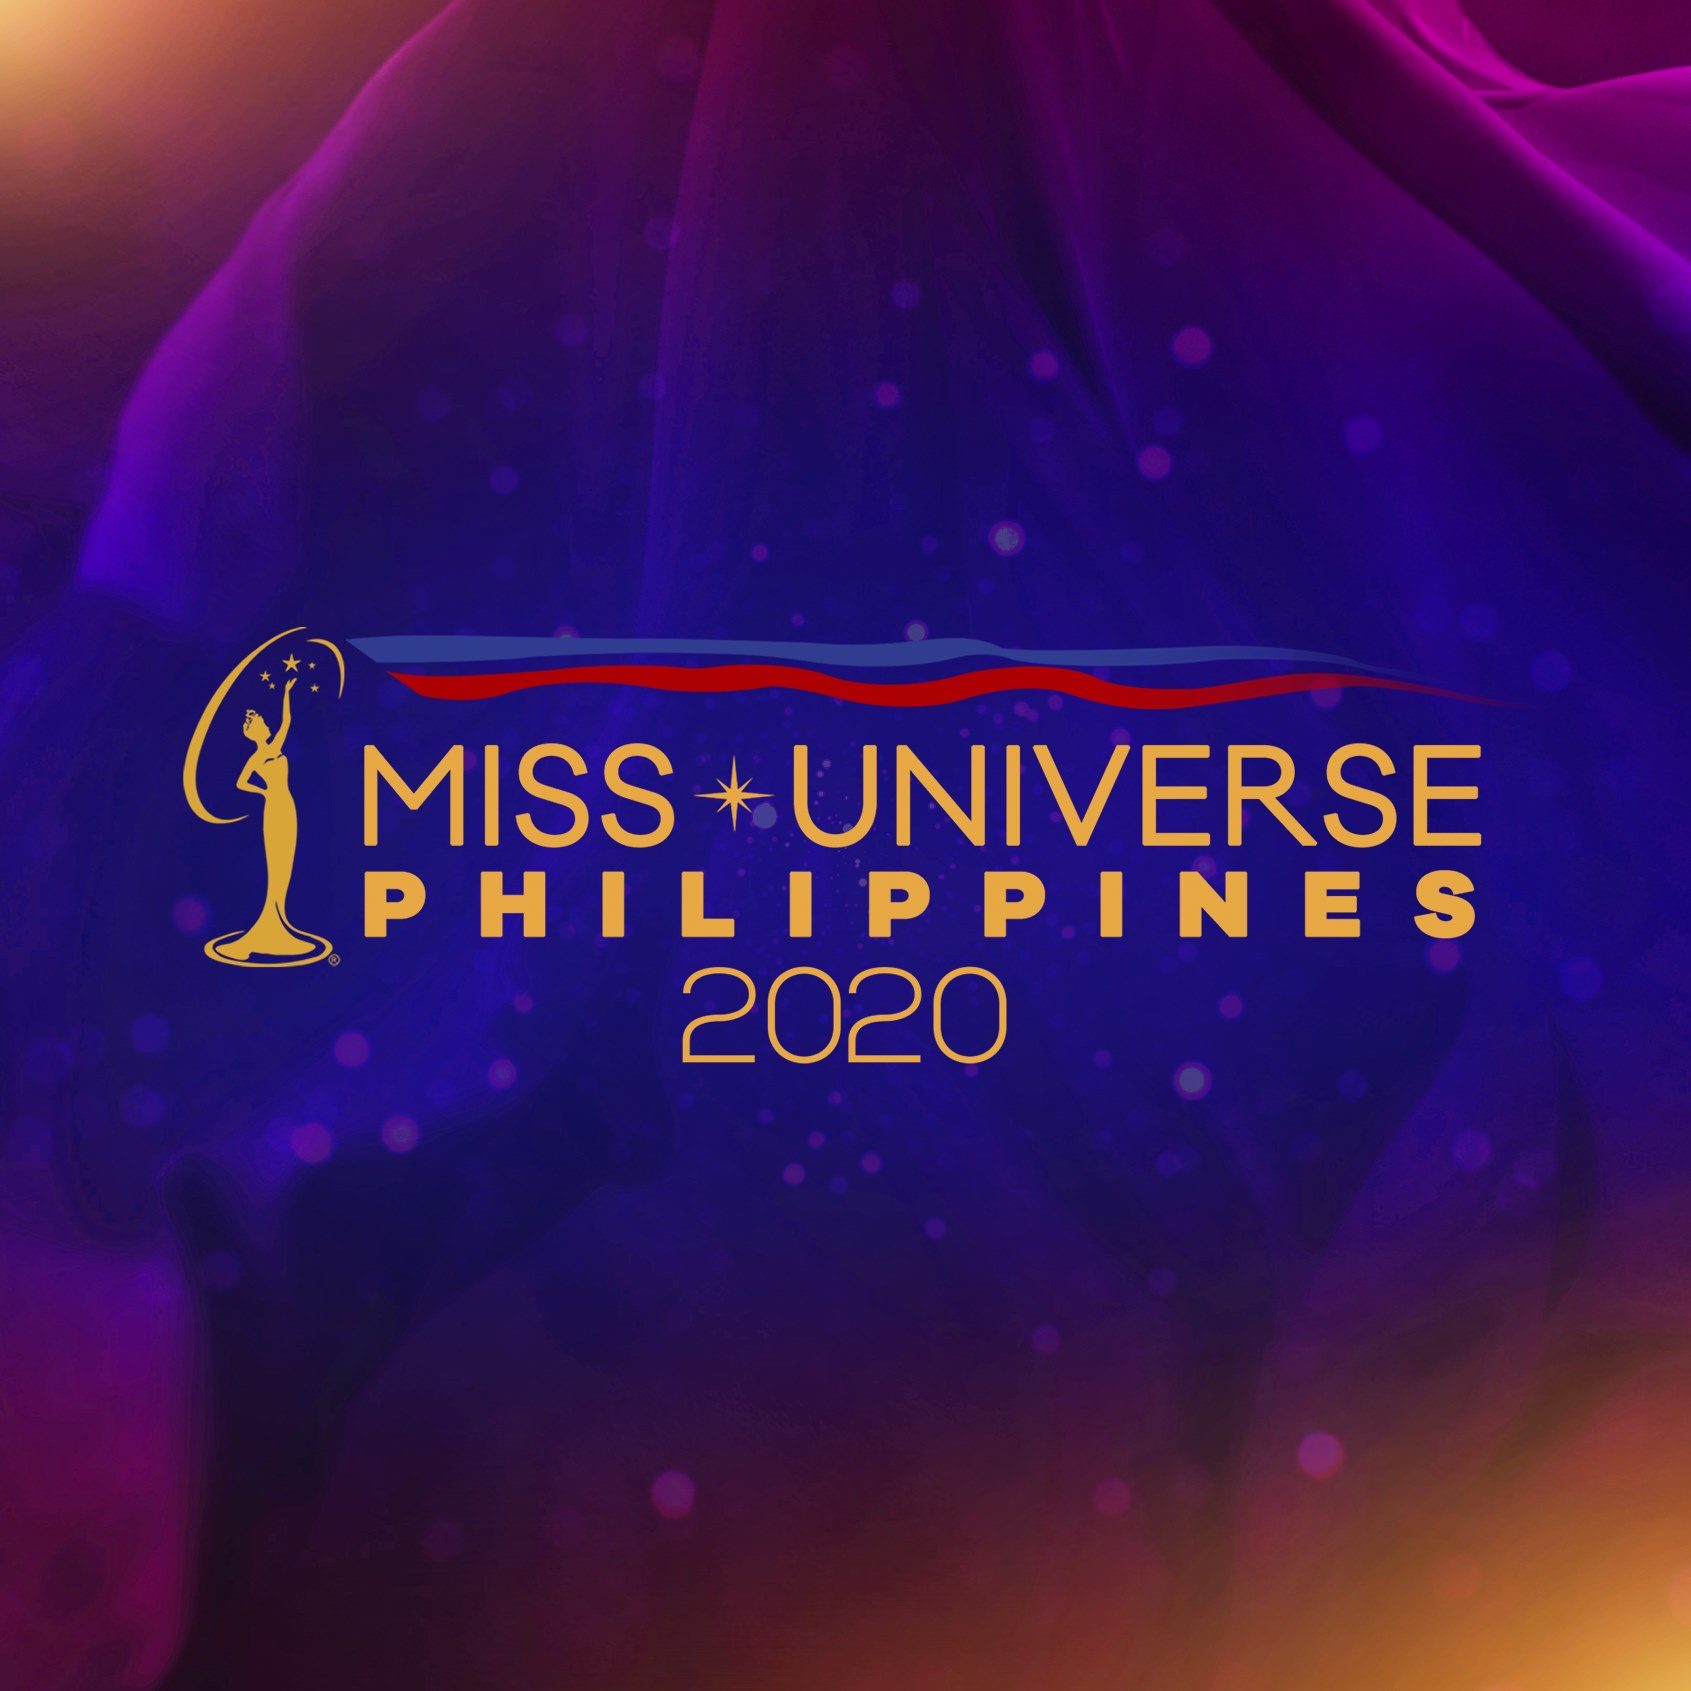 What you need to know about the Miss Universe Philippines 2020 finals on October 25